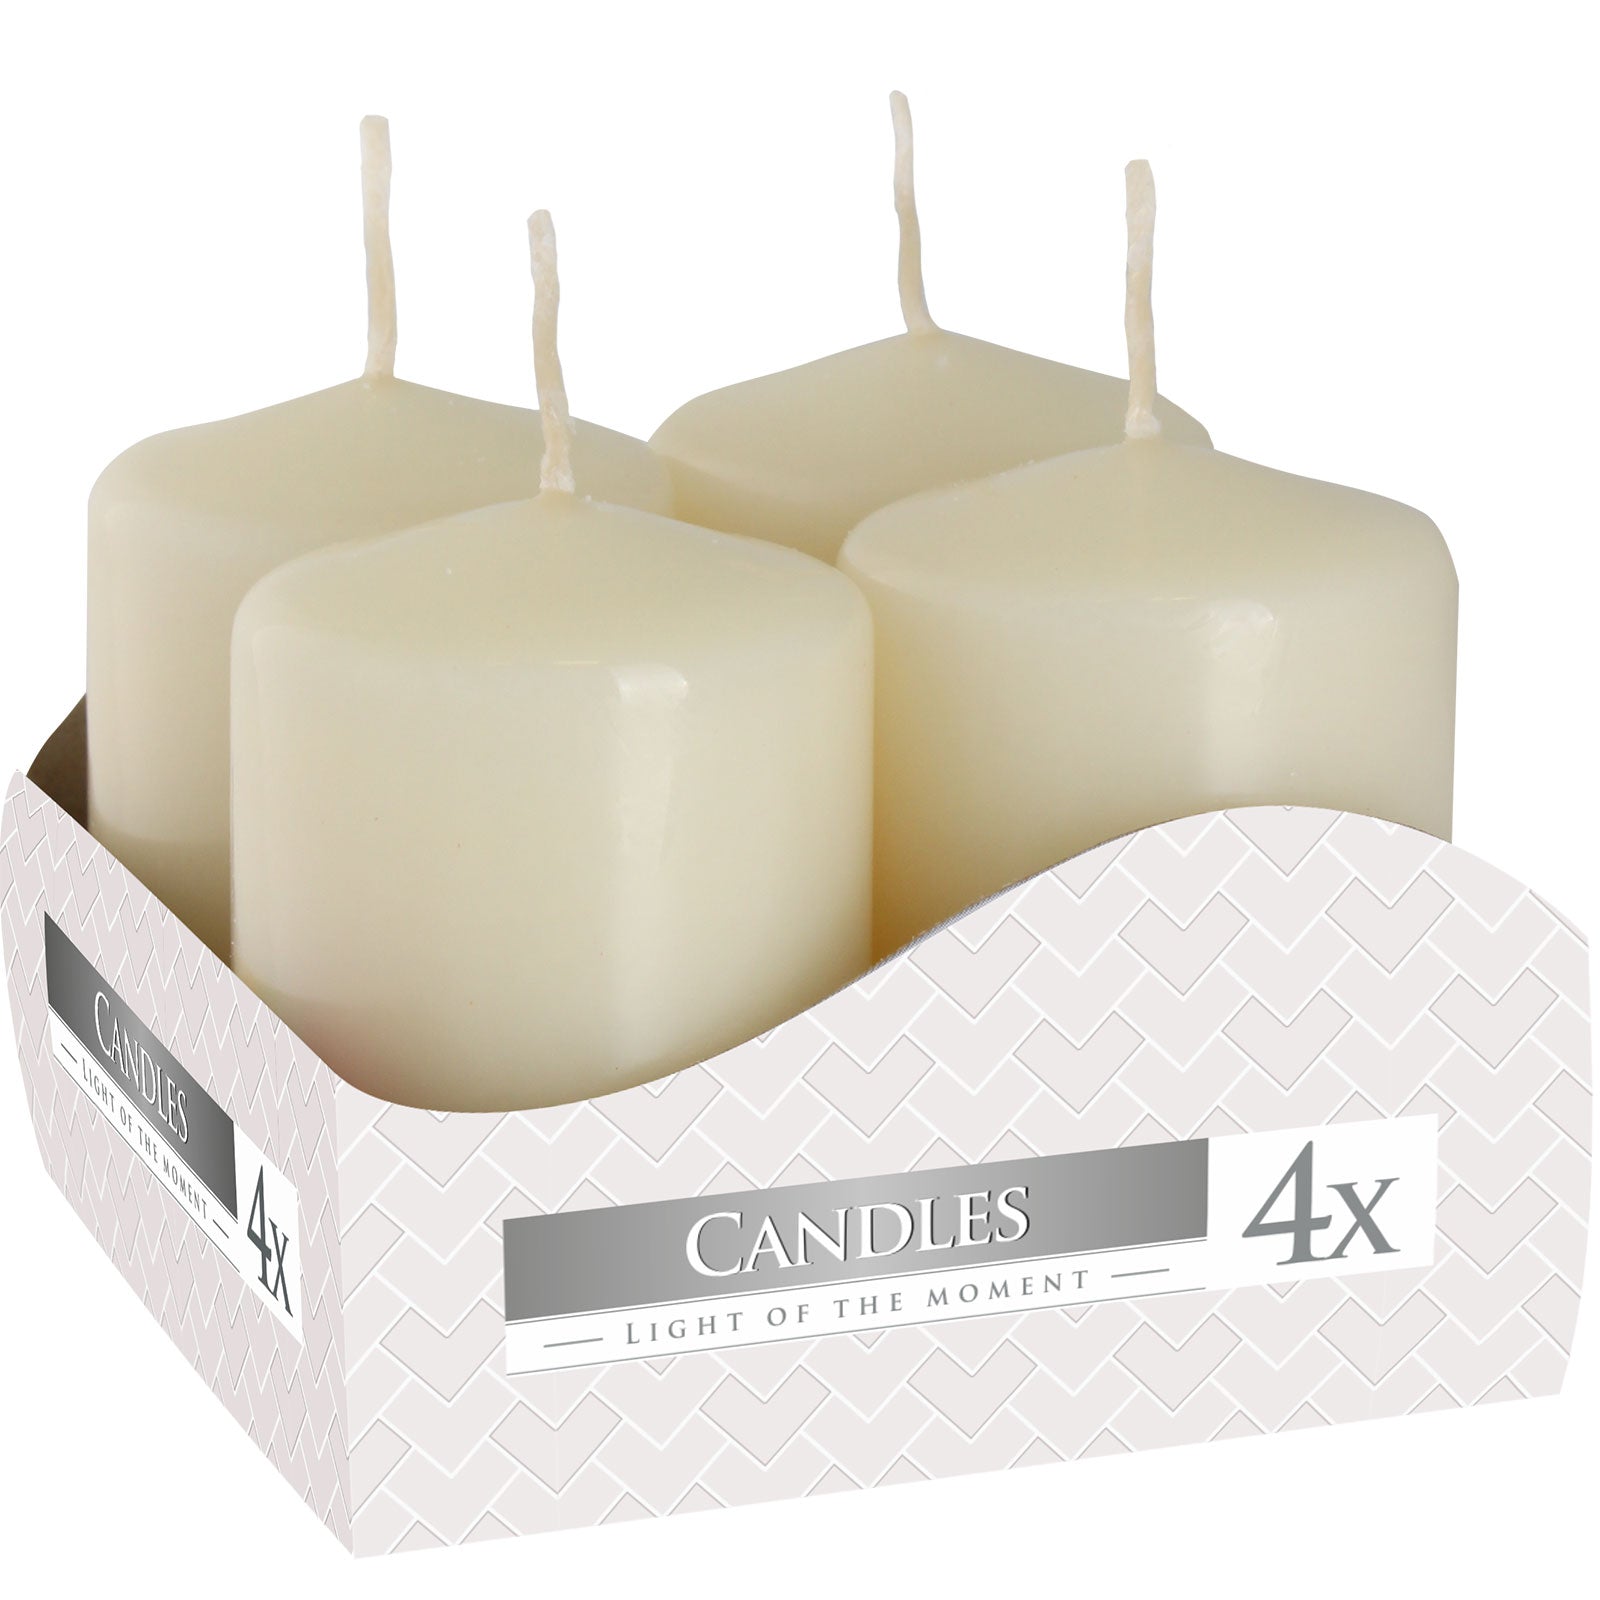 View Set of 4 Pillar Candles 40x60mm Ivory information